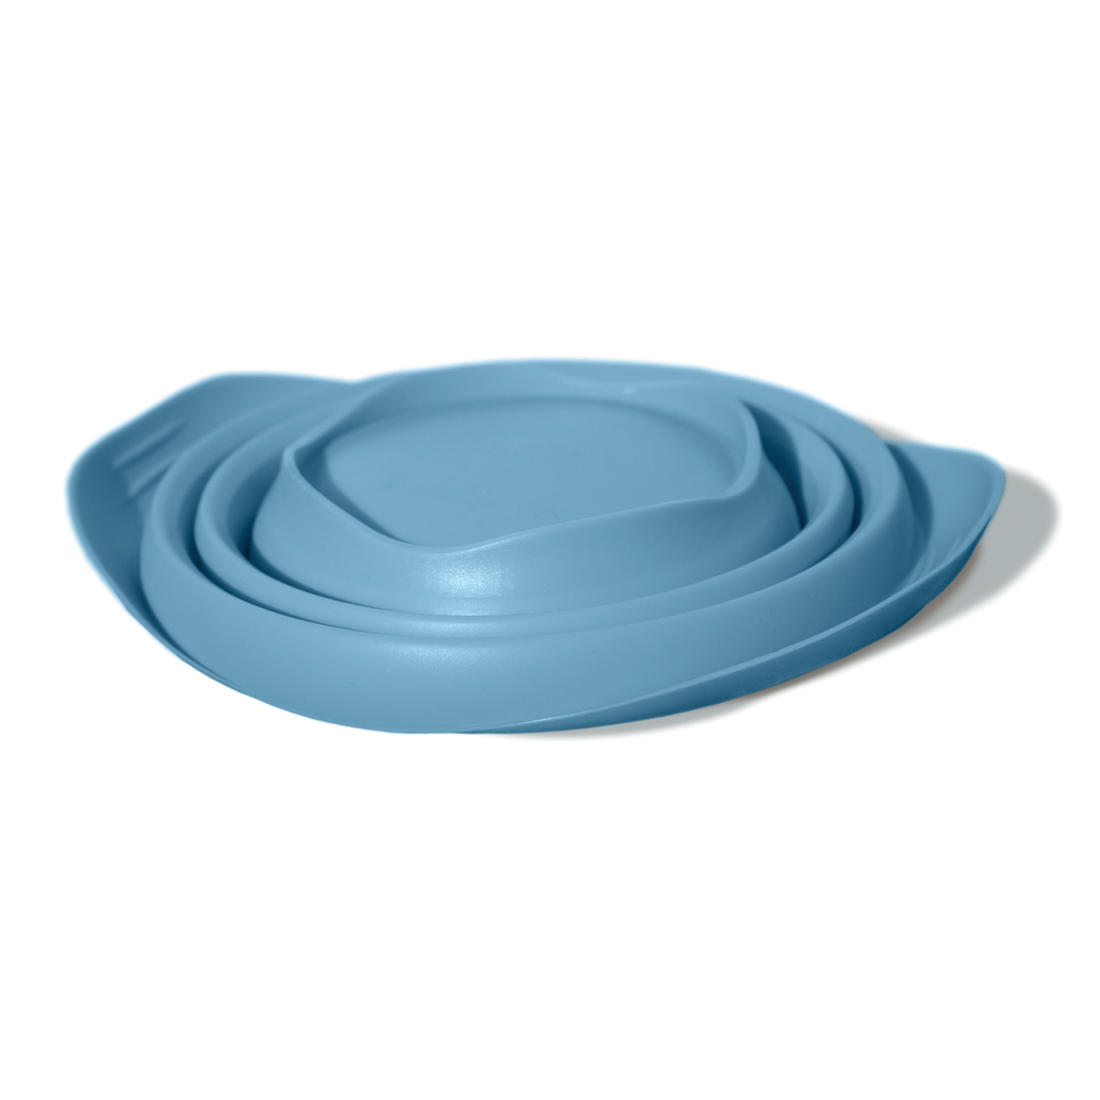 Kurgo collaps-a-bowl blue collapsed